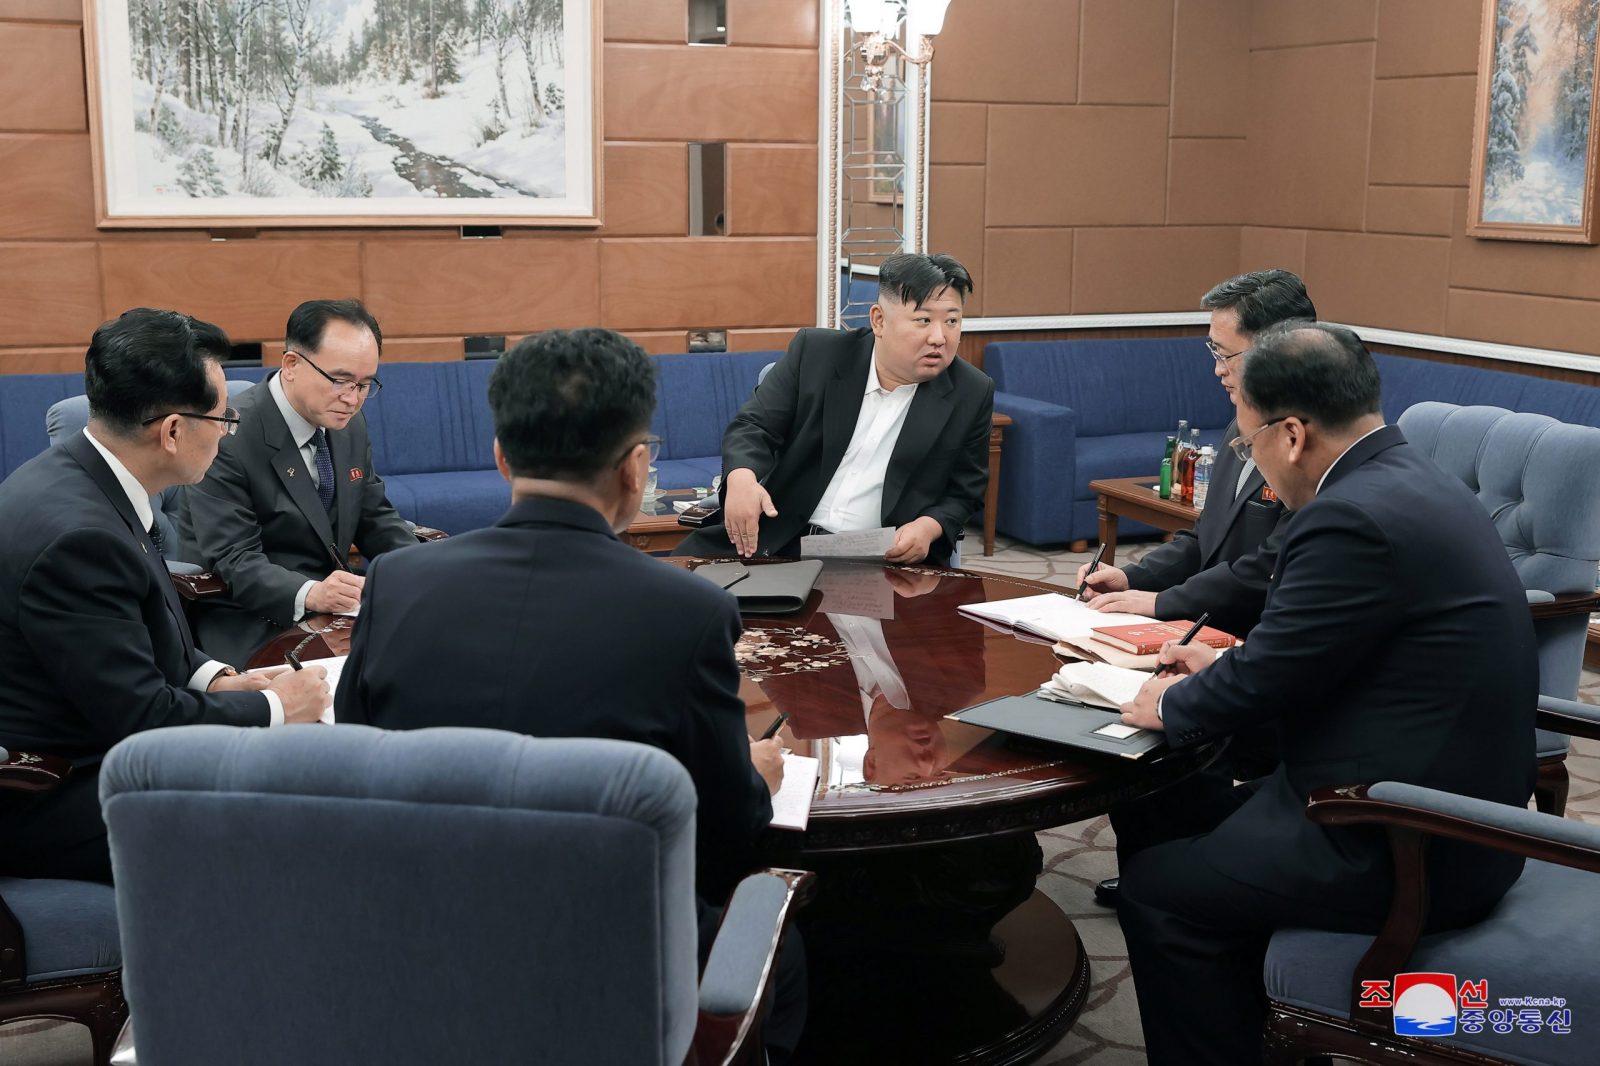 epa10382328 A photo released by the official North Korean Central News Agency (KCNA) shows North Korean supreme leader Kim Jong-un (C) meeting with senior Workers' Party of Korea officials during the fourth-day session of the sixth enlarged meeting of the eighth Central Committee of the Workers' Party of Korea in Pyongyang, North Korea, 29 December 2022 (issued 30 December 2022).  EPA/KCNA   EDITORIAL USE ONLY